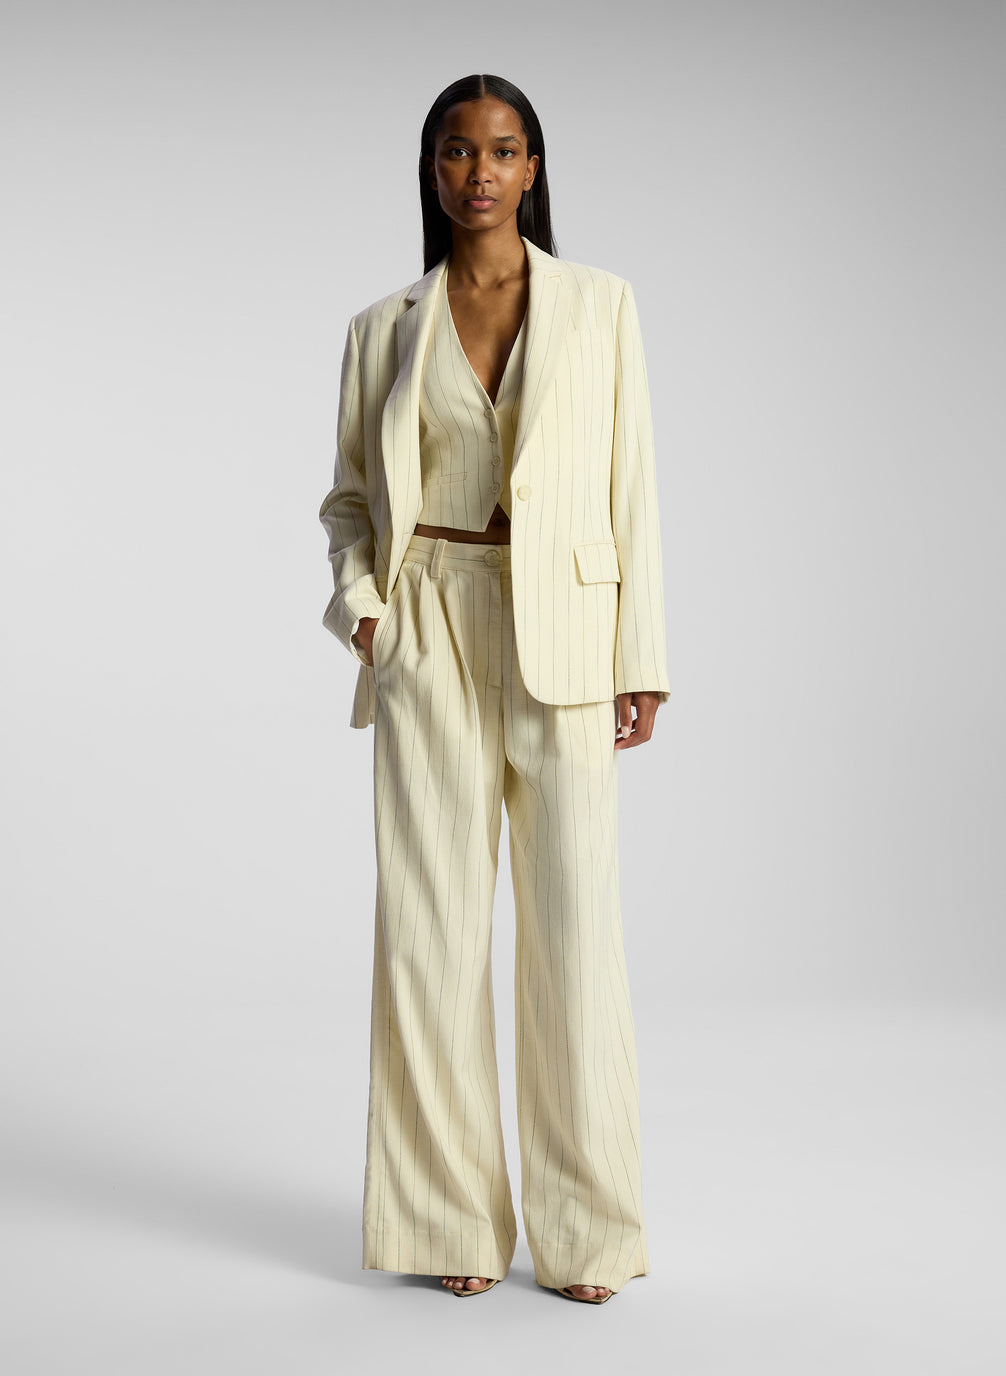 front view of woman wearing cream pinstripe suit